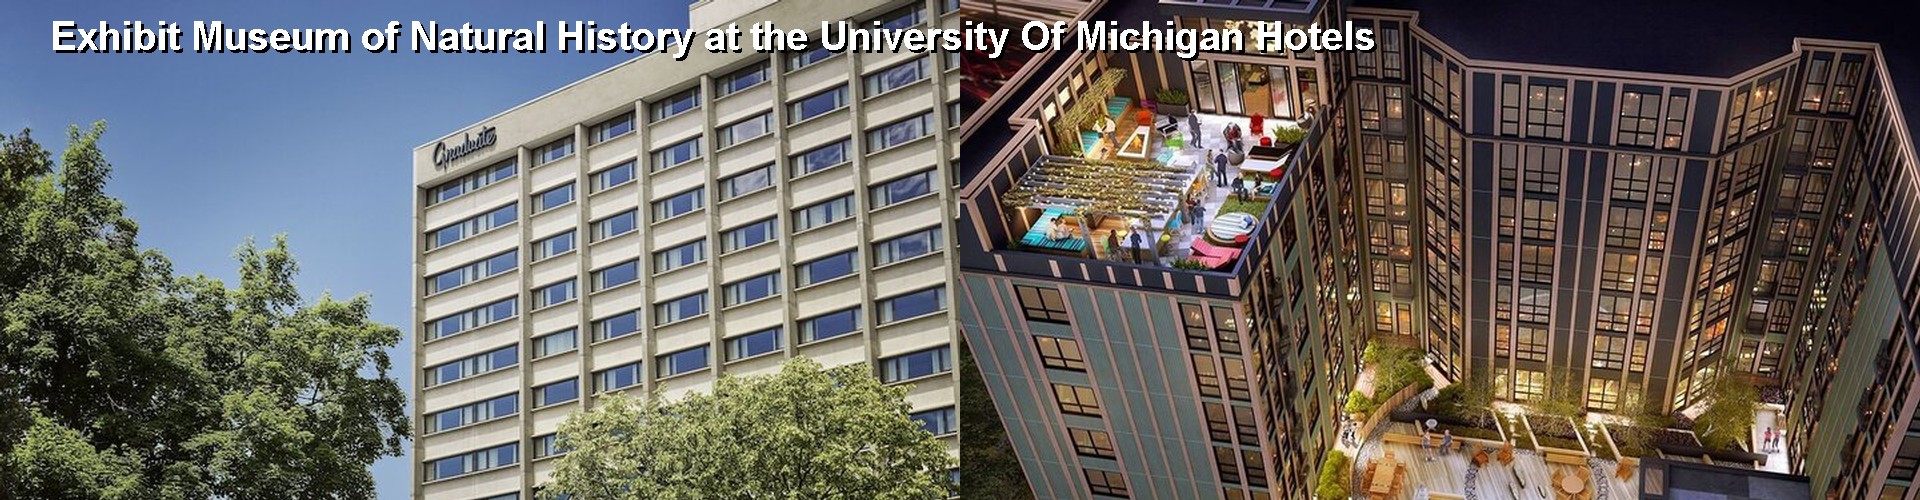 5 Best Hotels near Exhibit Museum of Natural History at the University Of Michigan